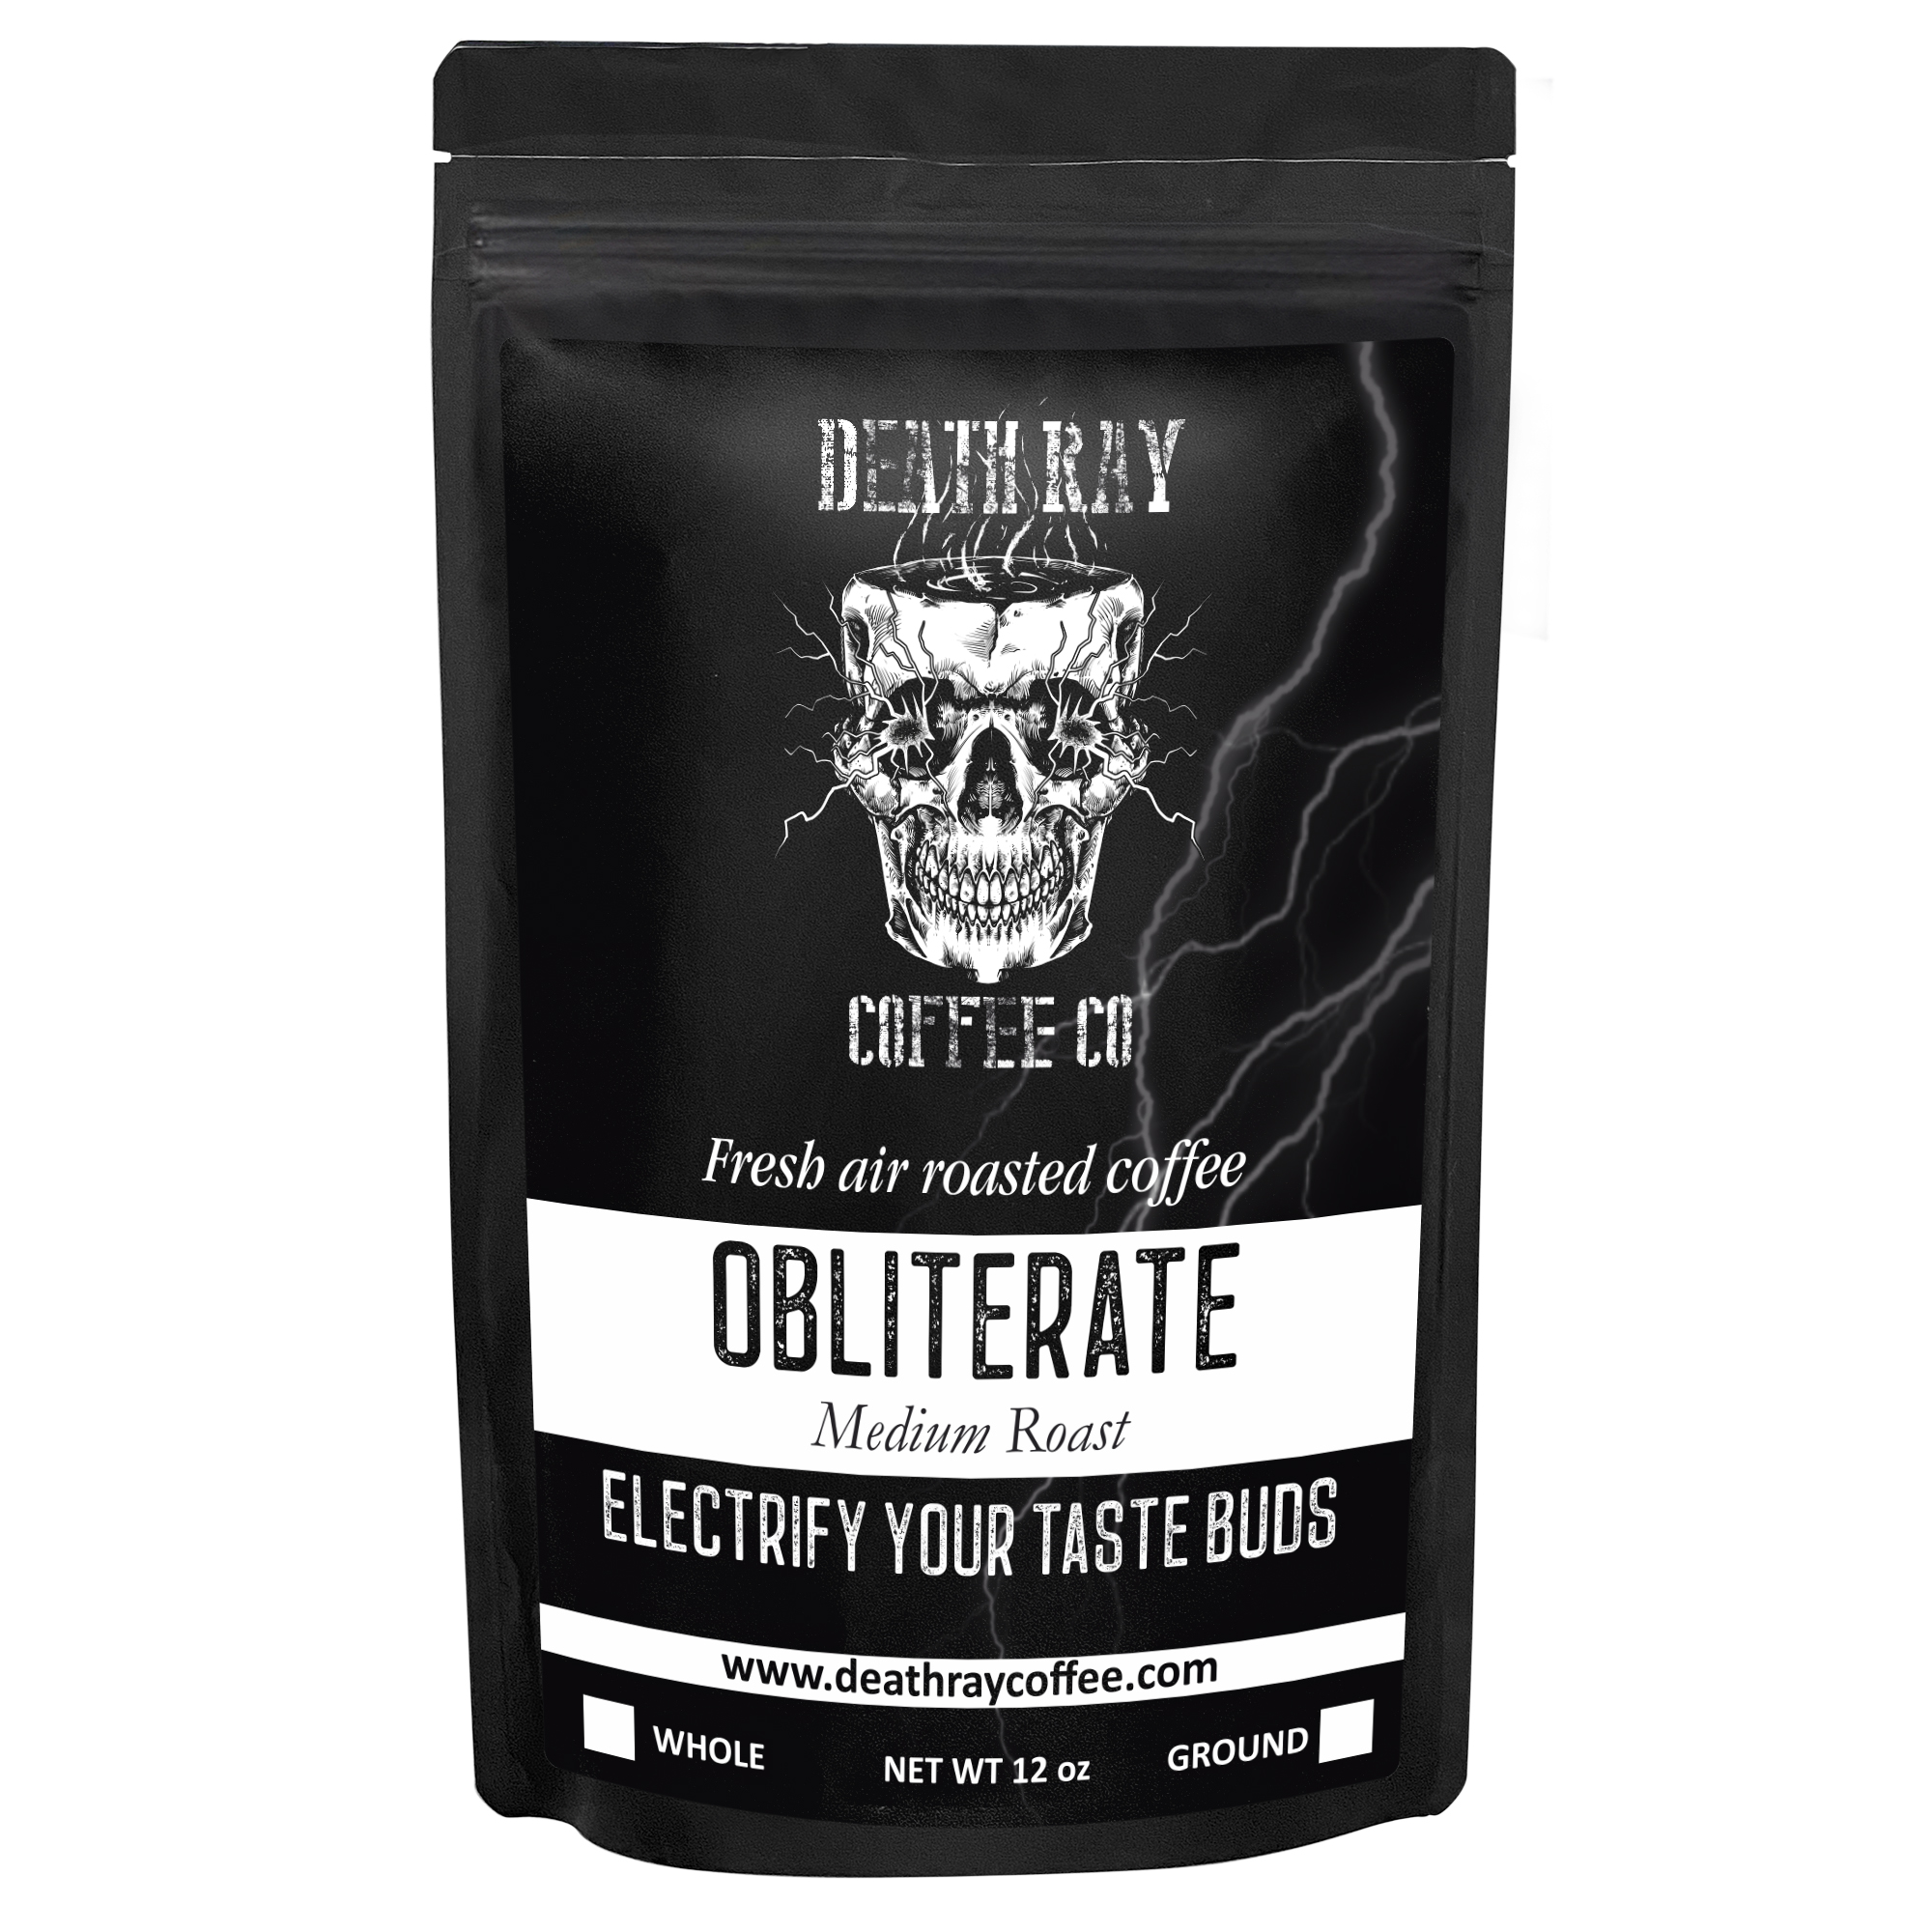 Bag Of Obliterate Coffee Blend